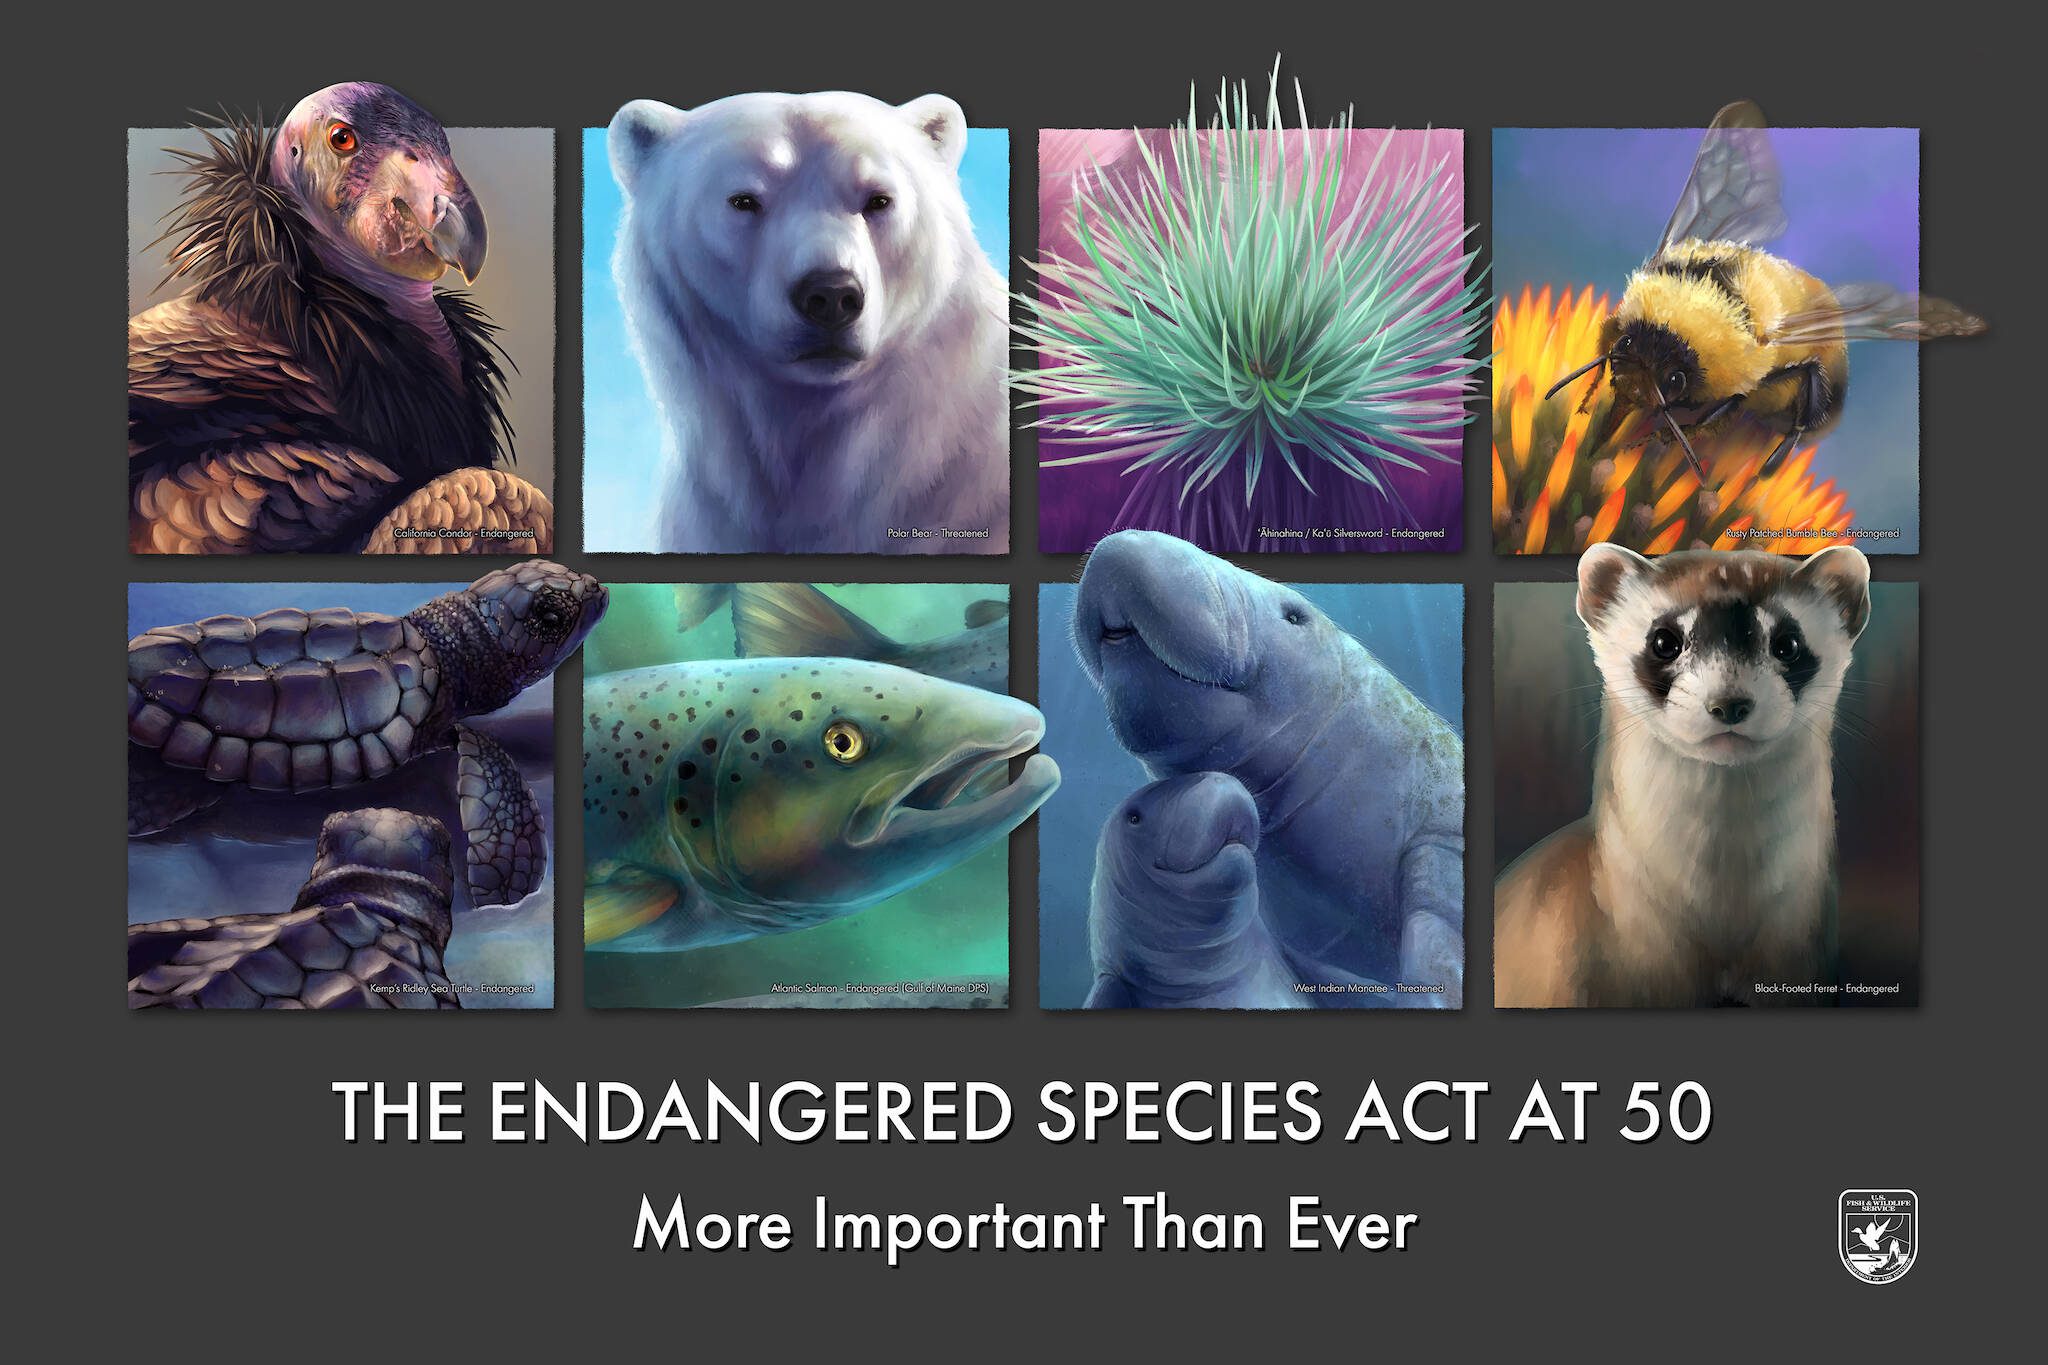 To commemorate the 50th Anniversary of the Endangered Species Act, the U.S. Fish and Wildlife Service released a poster featuring eight federally listed species that have been put on the road to recovery. The eight portraits were painted by Lake Stevens native Cal Robinson, a public affairs specialist at the Sacramento Fish and Wildlife office. (Cal Robinson/USFWS)